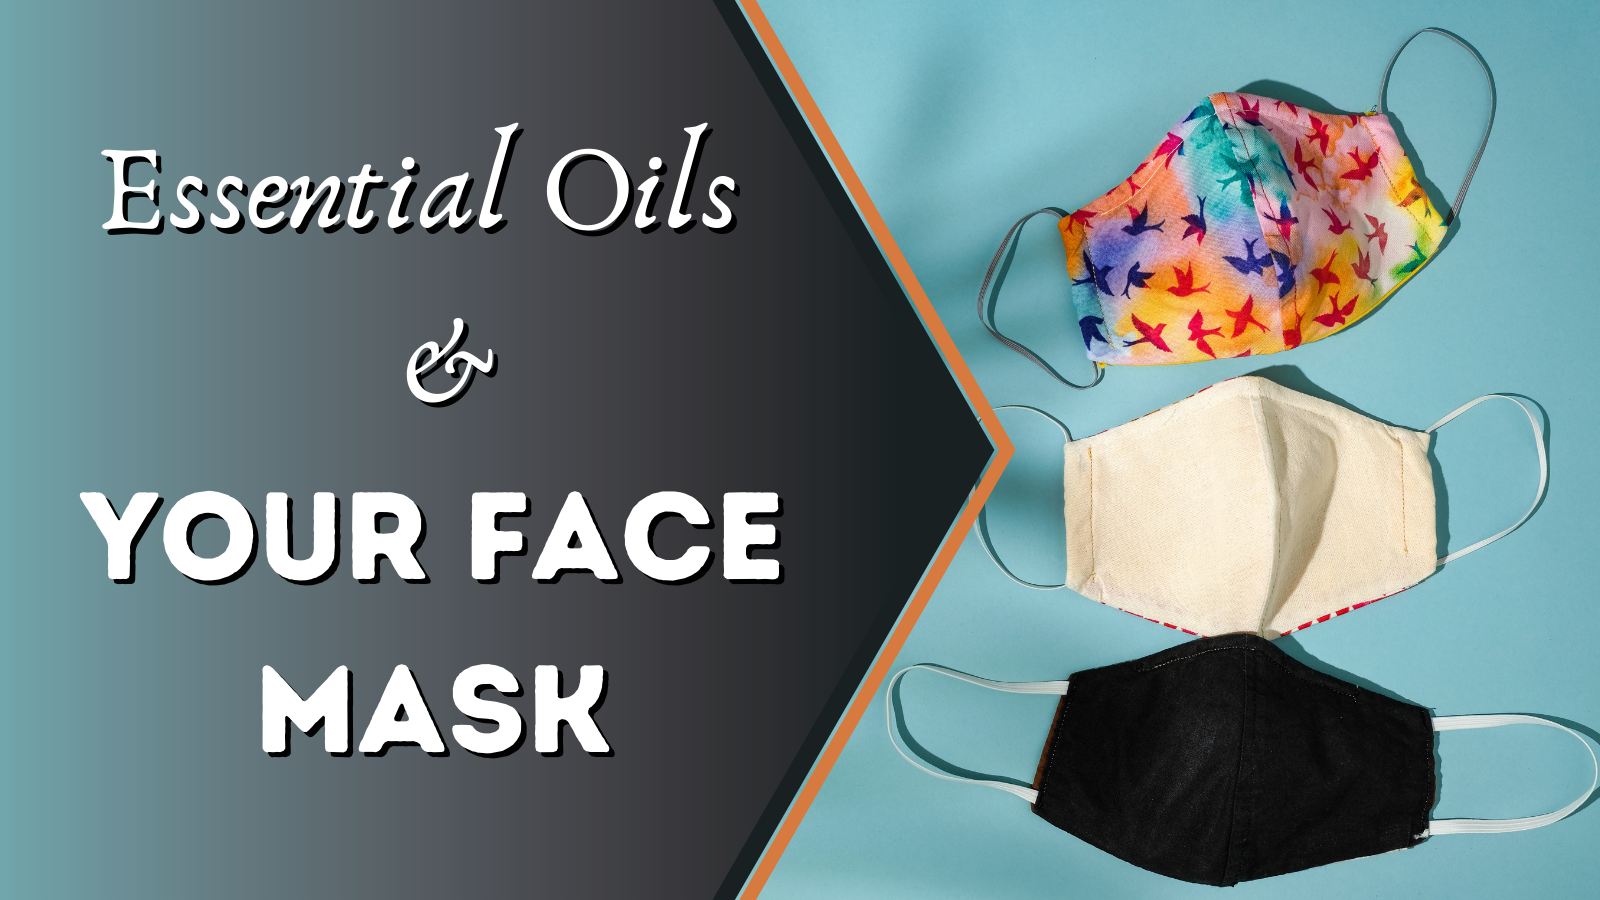 essential oils and your face mask